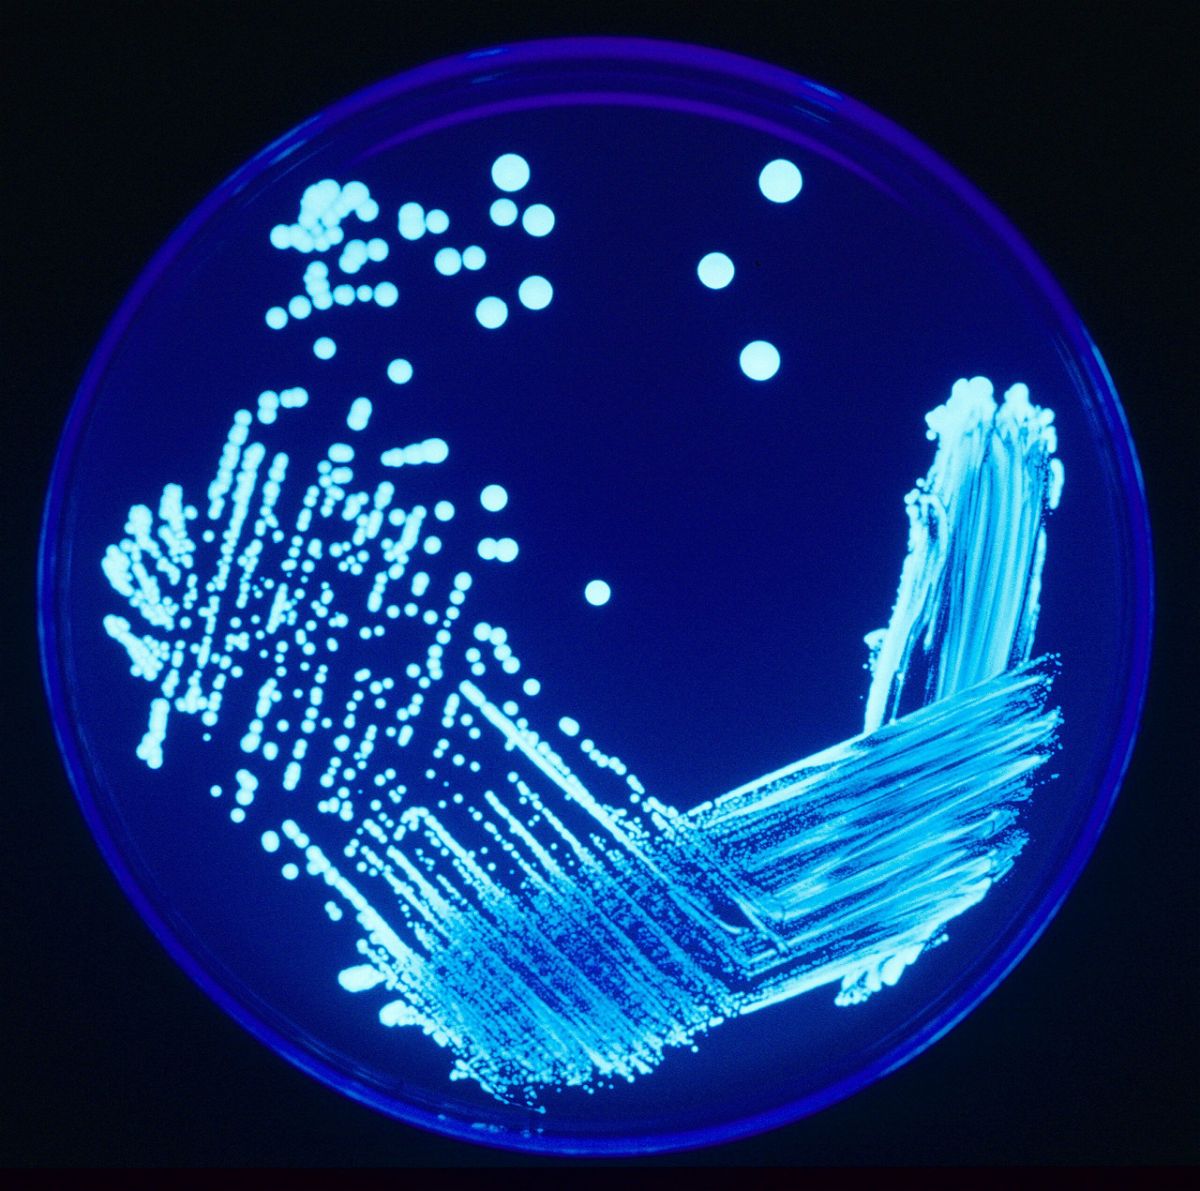 <i>Smith Collection/Gado/Archive Photos/Getty Images</i><br/>The CDC warns that instances of Legionnaires’ disease have increased “substantially” over the past decade.